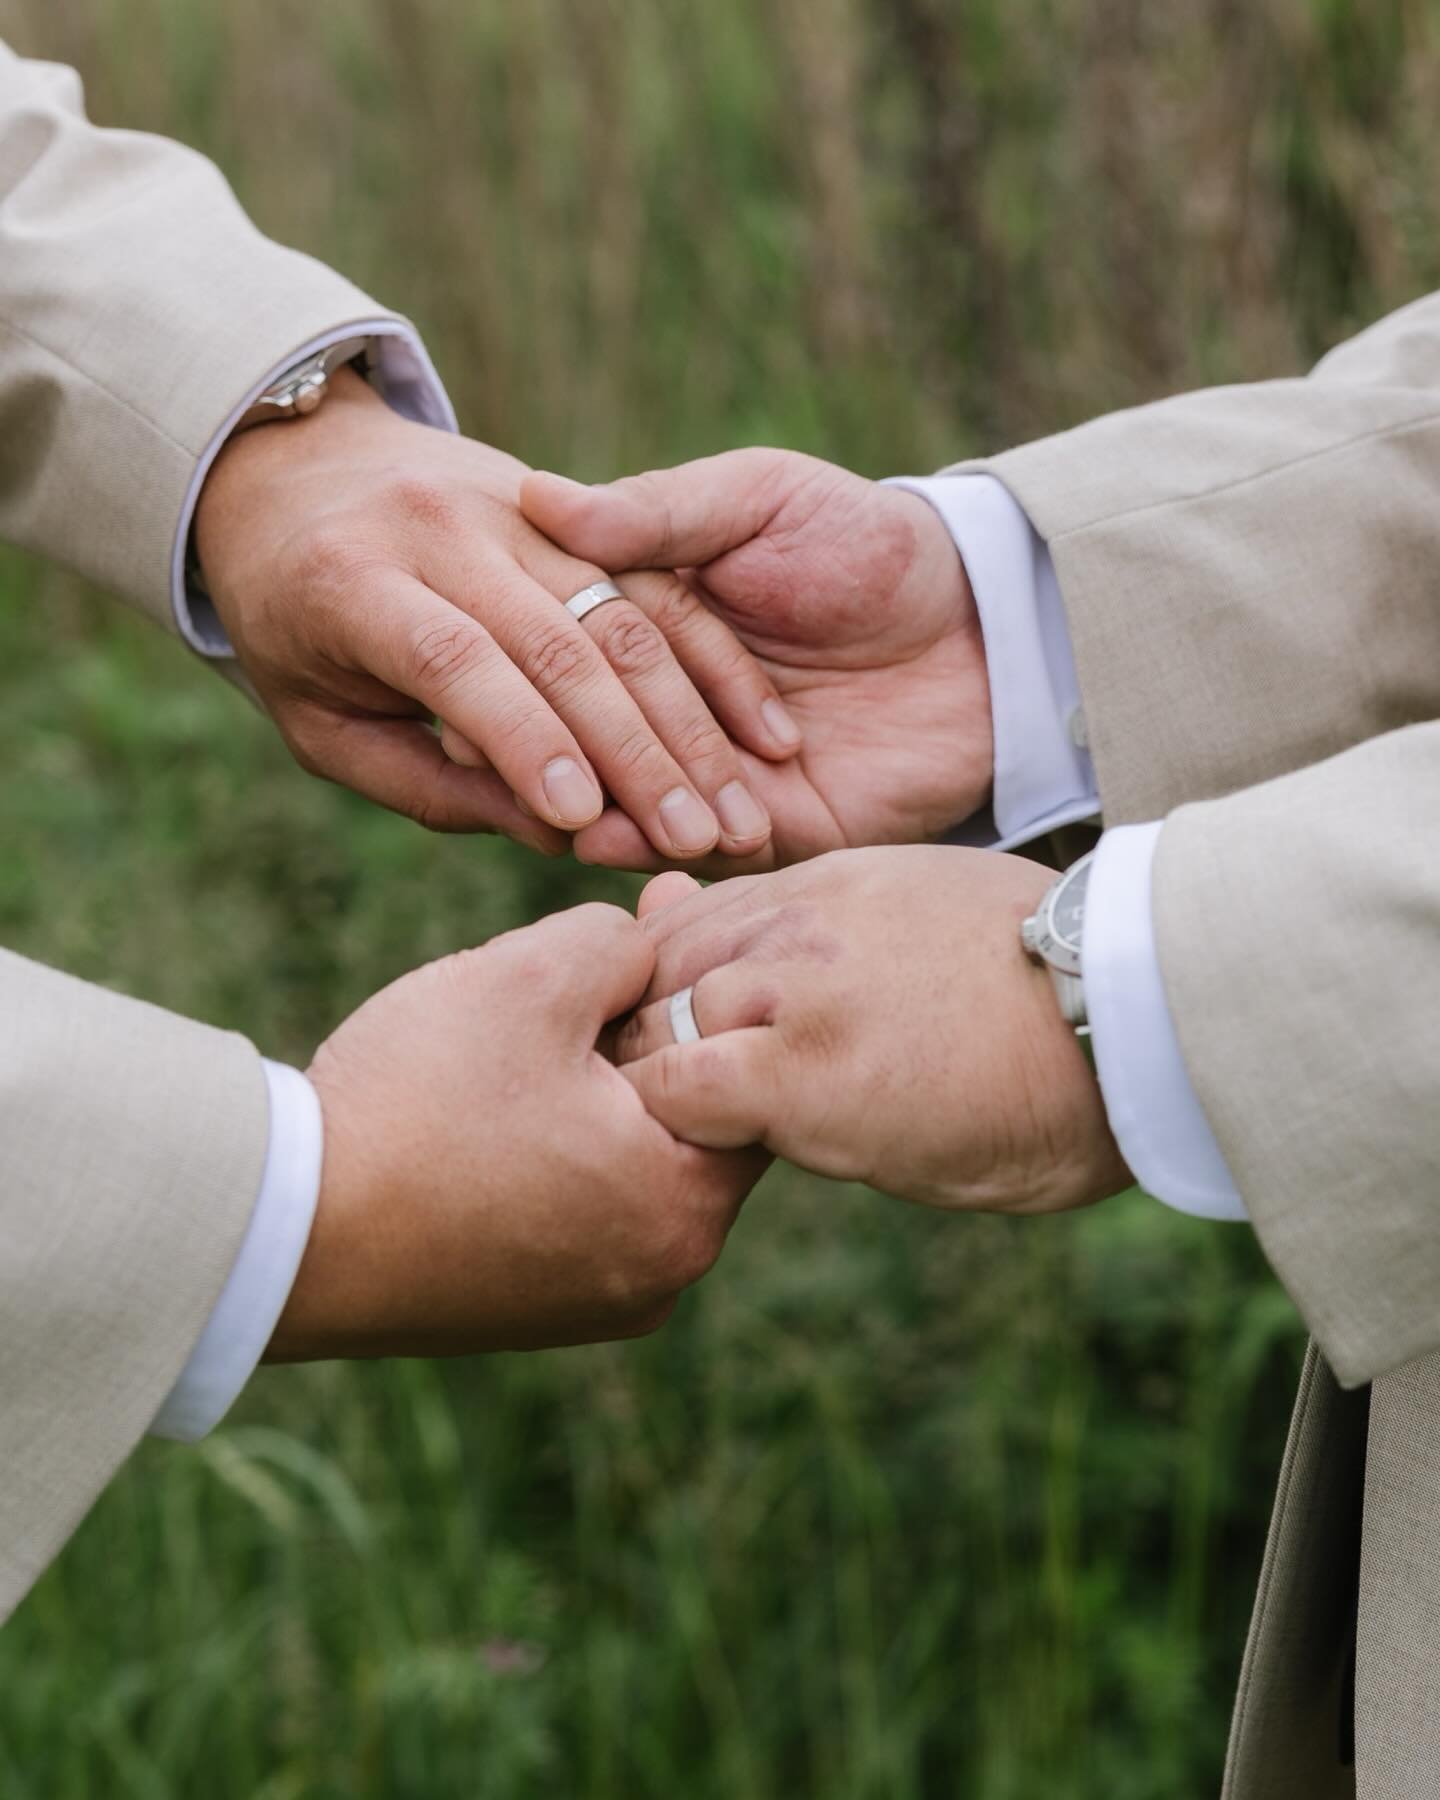 The simple act of holding each other&rsquo;s hand. It&rsquo;s intimate and special and feels so right when it&rsquo;s with your favorite person and soulmate&hellip; 

&hellip;not to mention it looks so good when you get to have your WEDDING RINGS ON!